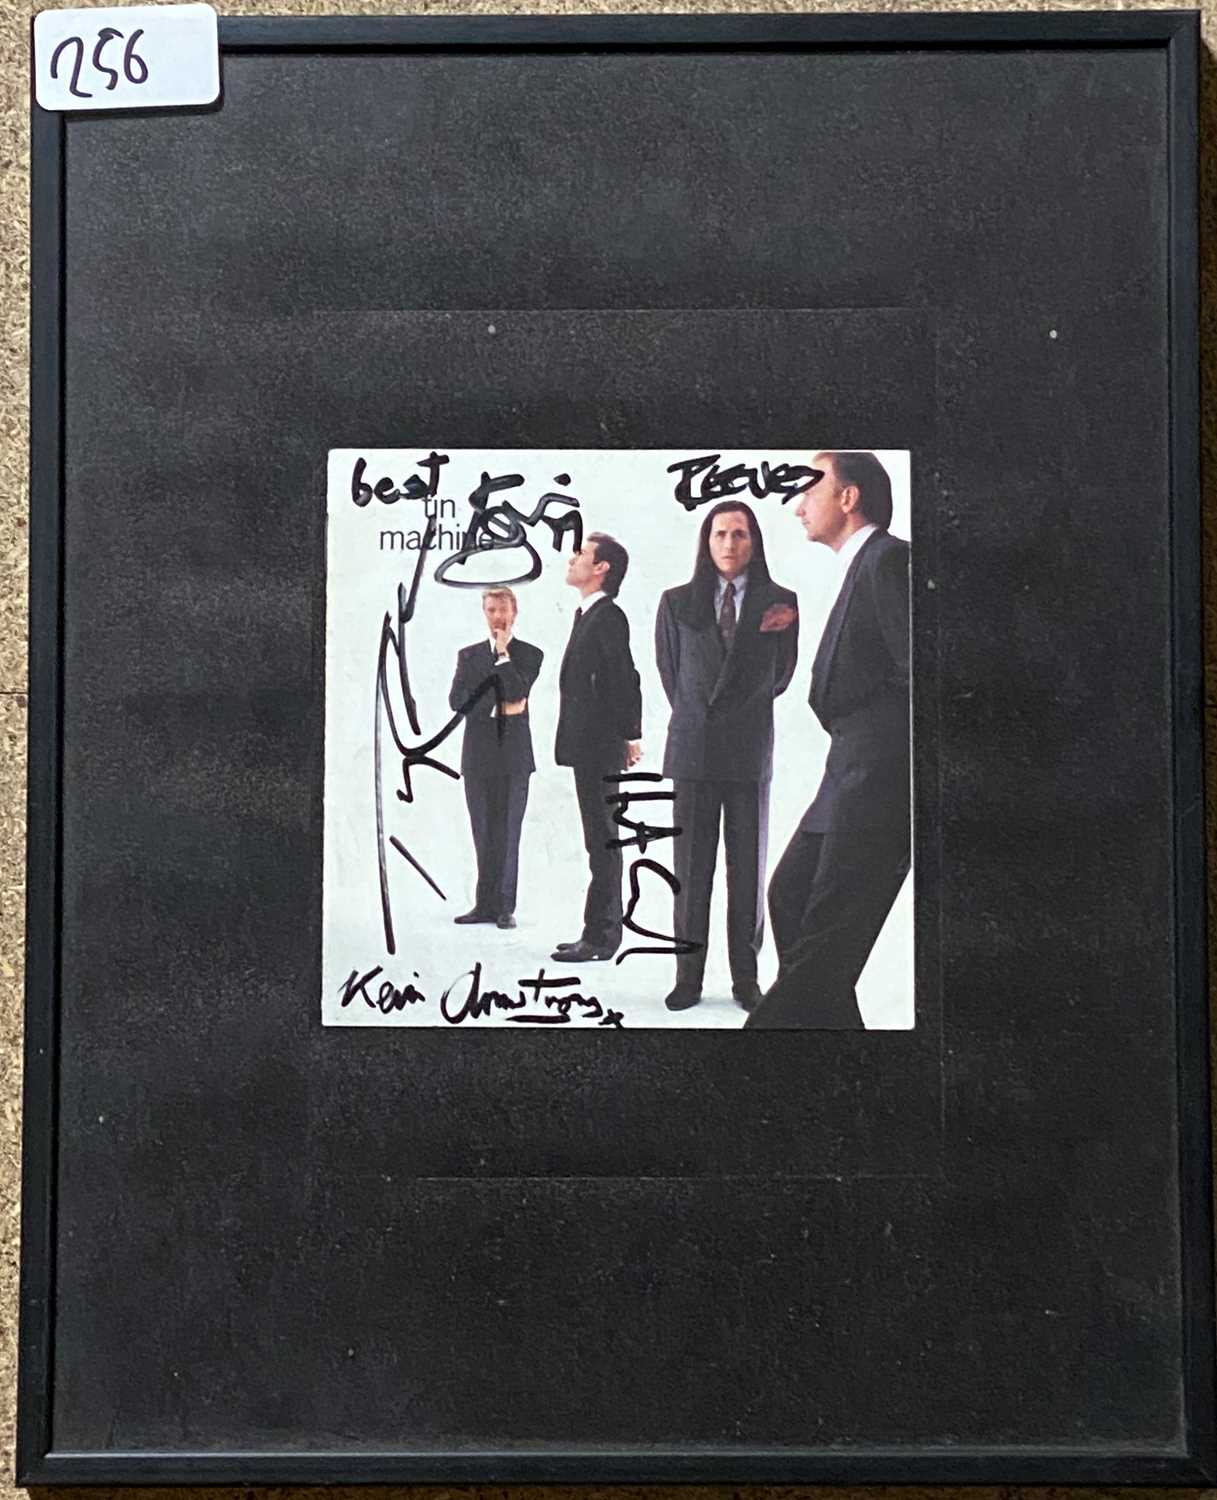 Lot 256 - DAVID BOWIE TIN MACHINE SIGNED INNER